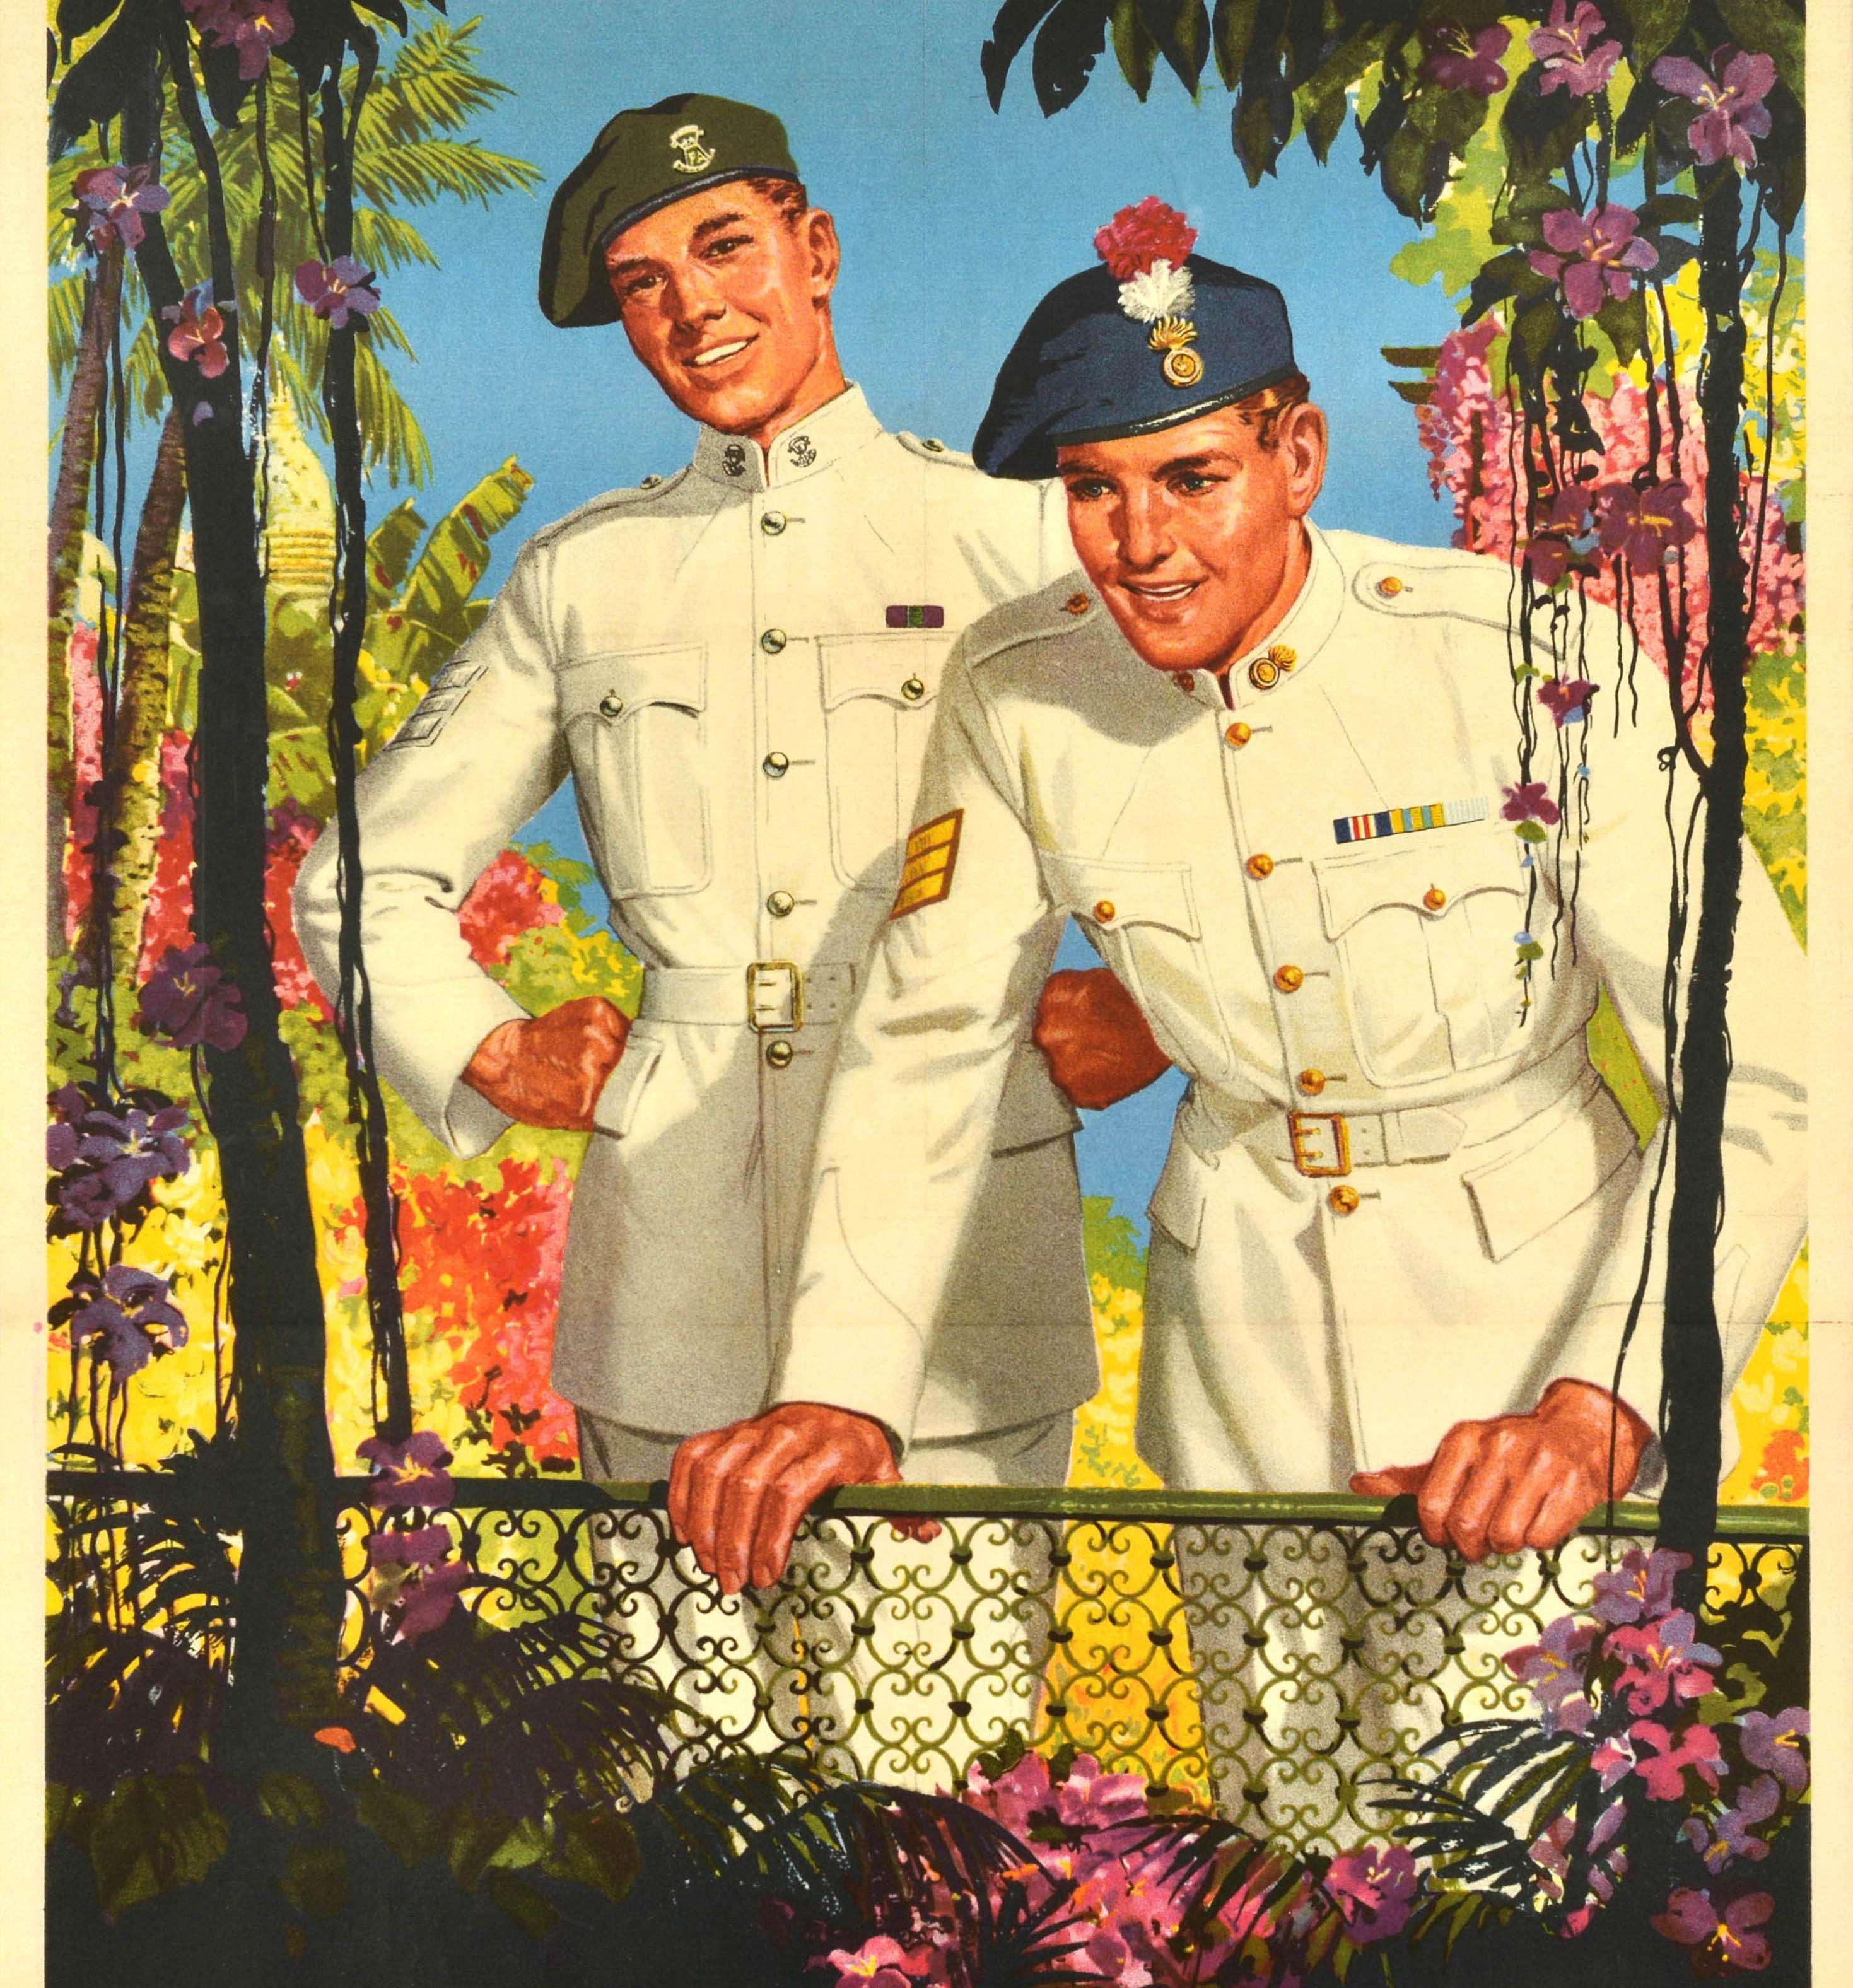 Original vintage British military recruitment poster - See it all ... in the Regular Army and you can join at 17½ - featuring an illustration of two soldiers from the Royal Regiment of Fusiliers and British Light Infantry wearing white uniforms and